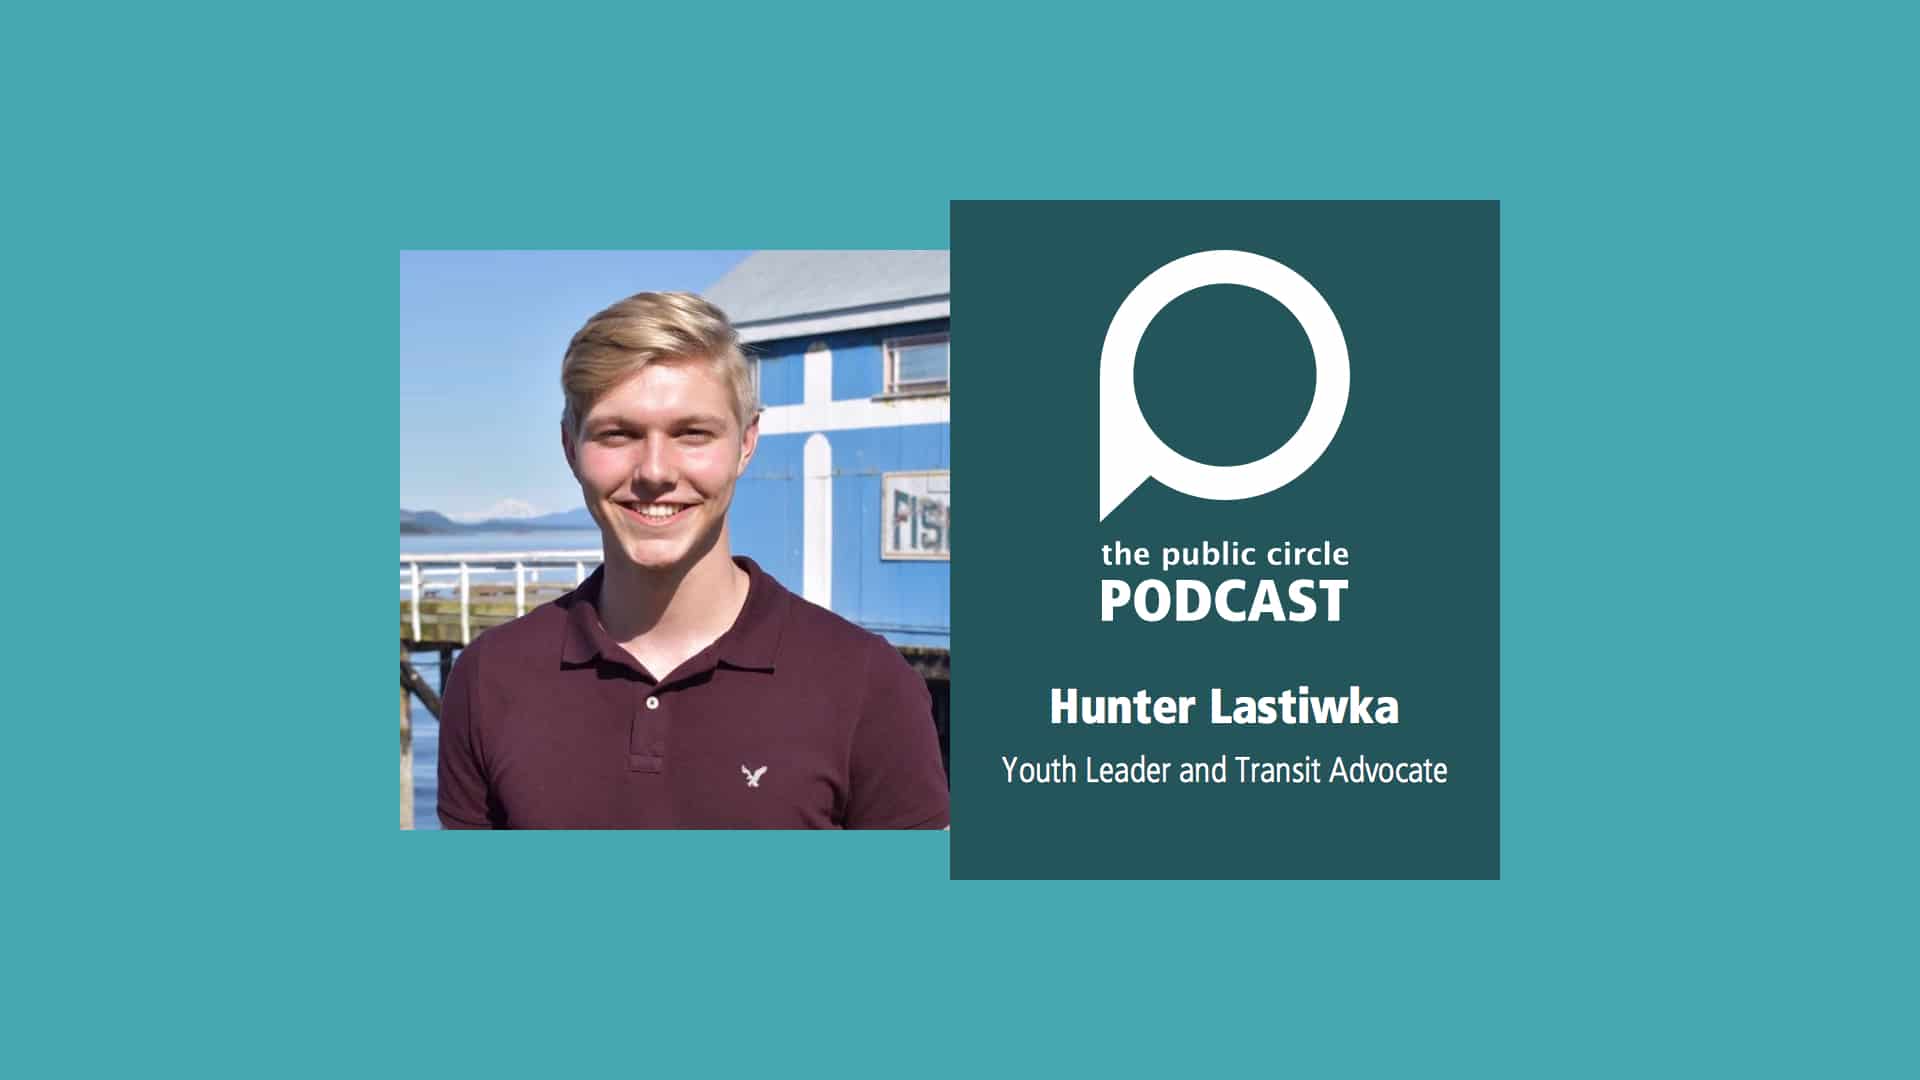 PODCAST: Hunter Lastiwka – Youth Leader and Transit Advocate